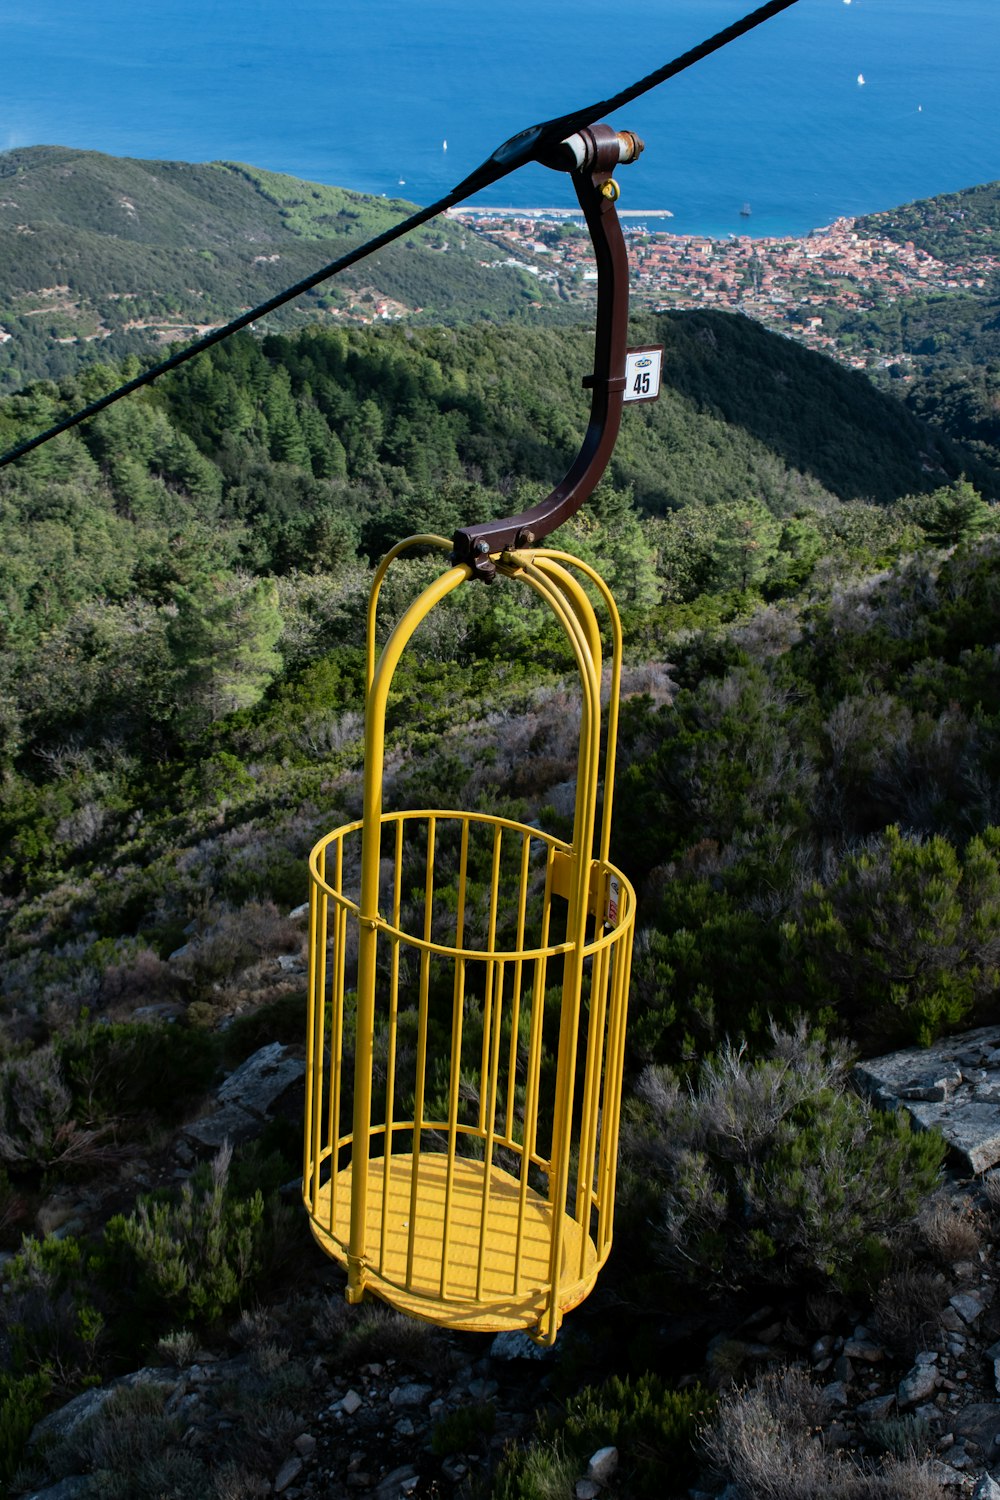 yellow cable car over green mountain during daytime